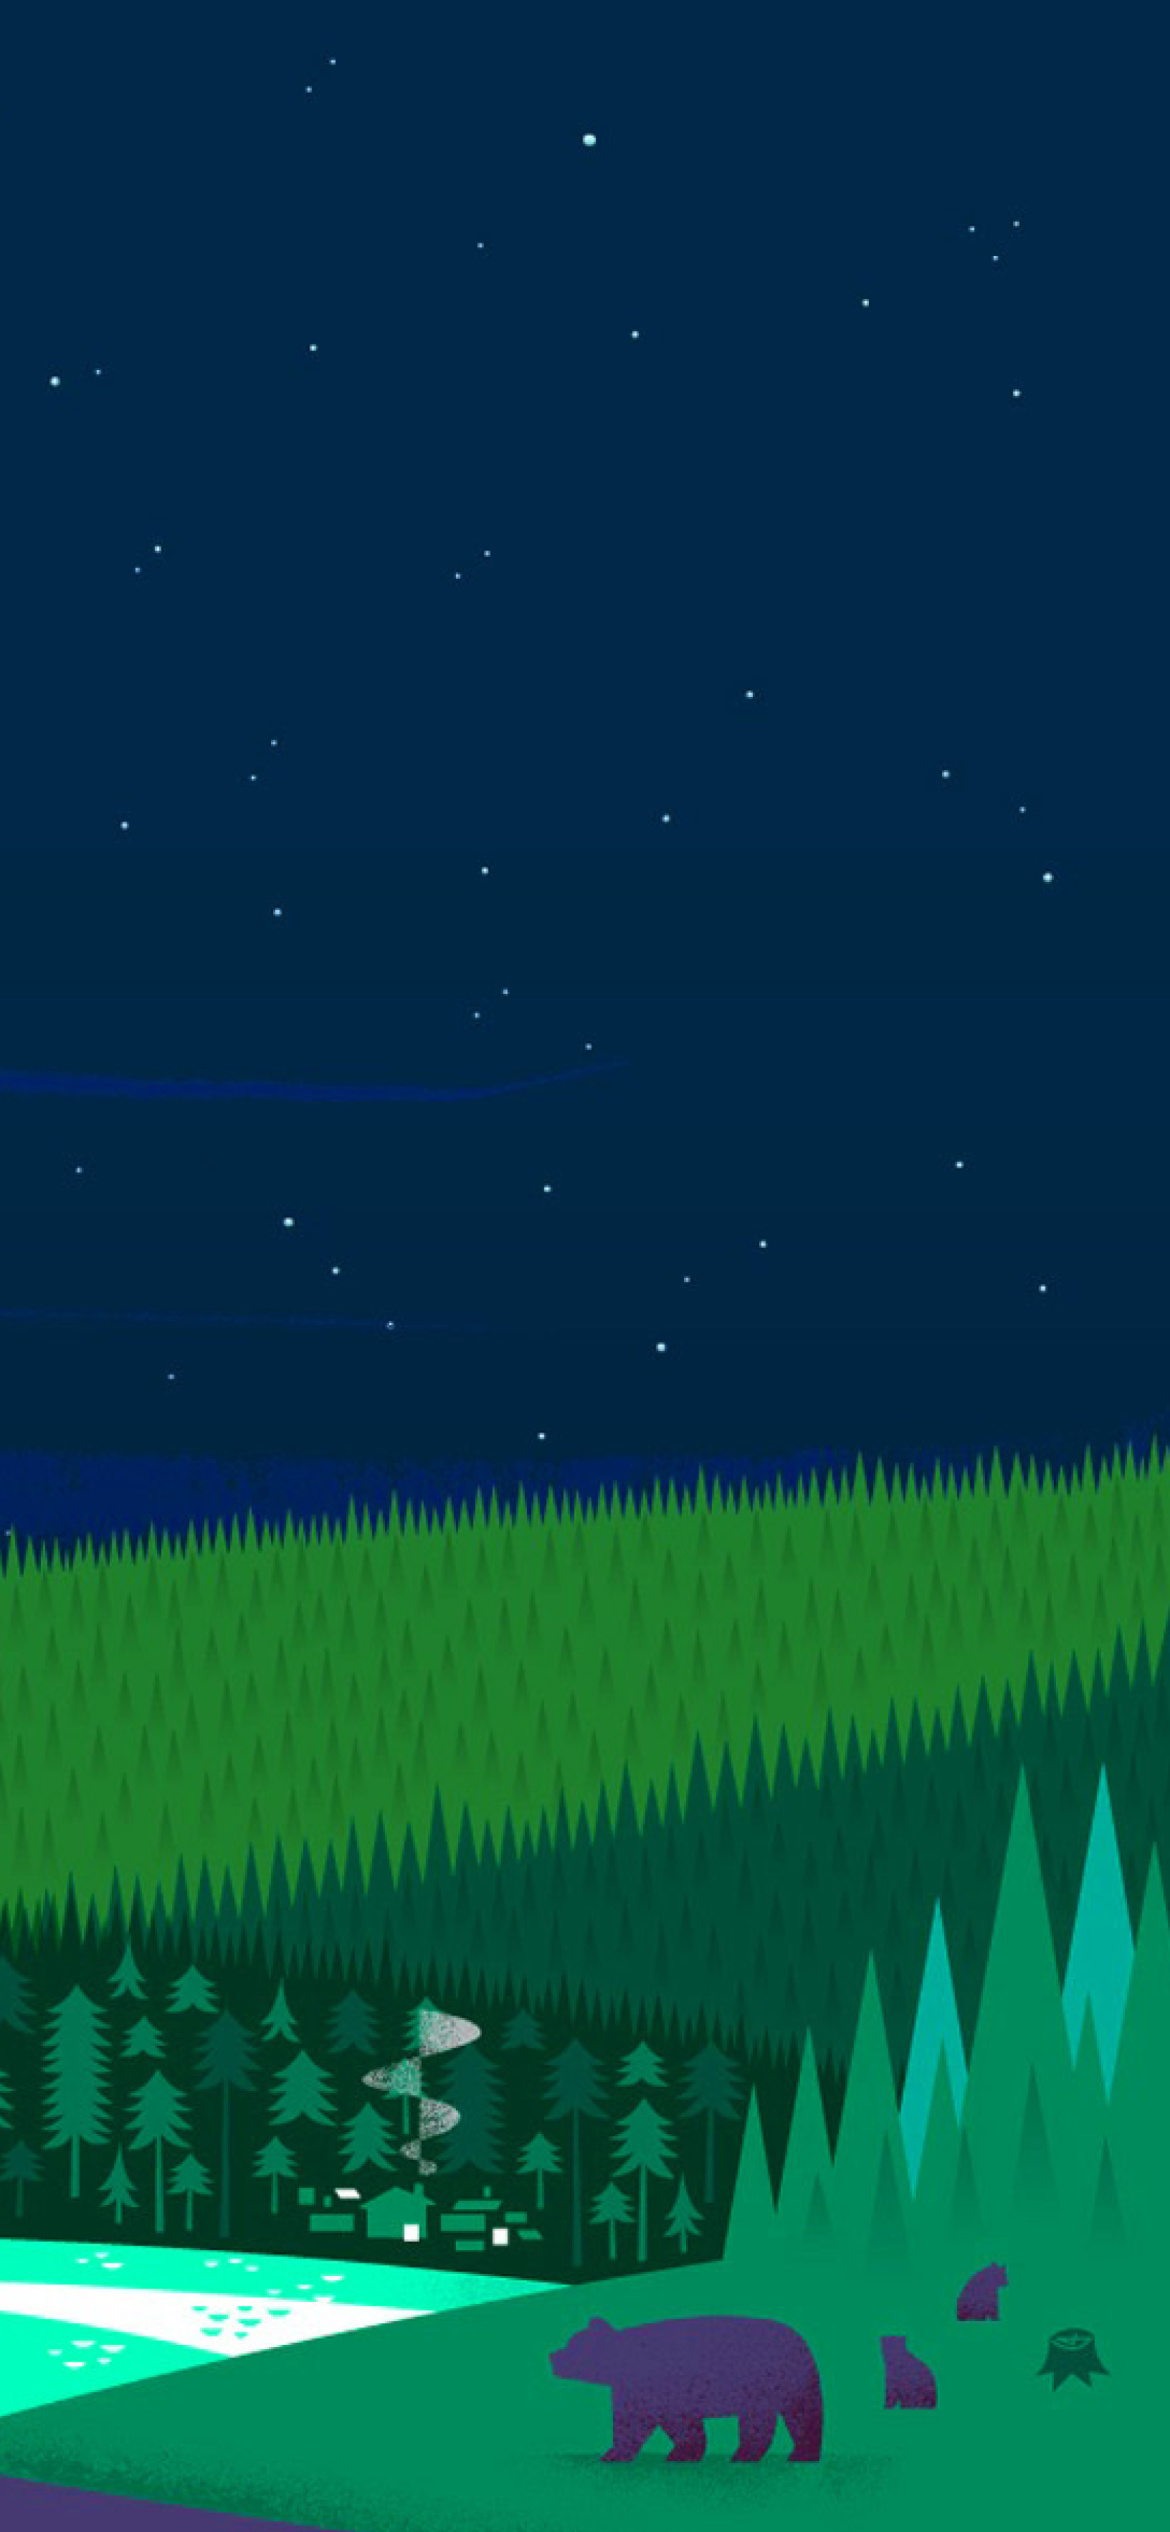 Sfondi Graphics night and bears in forest 1170x2532